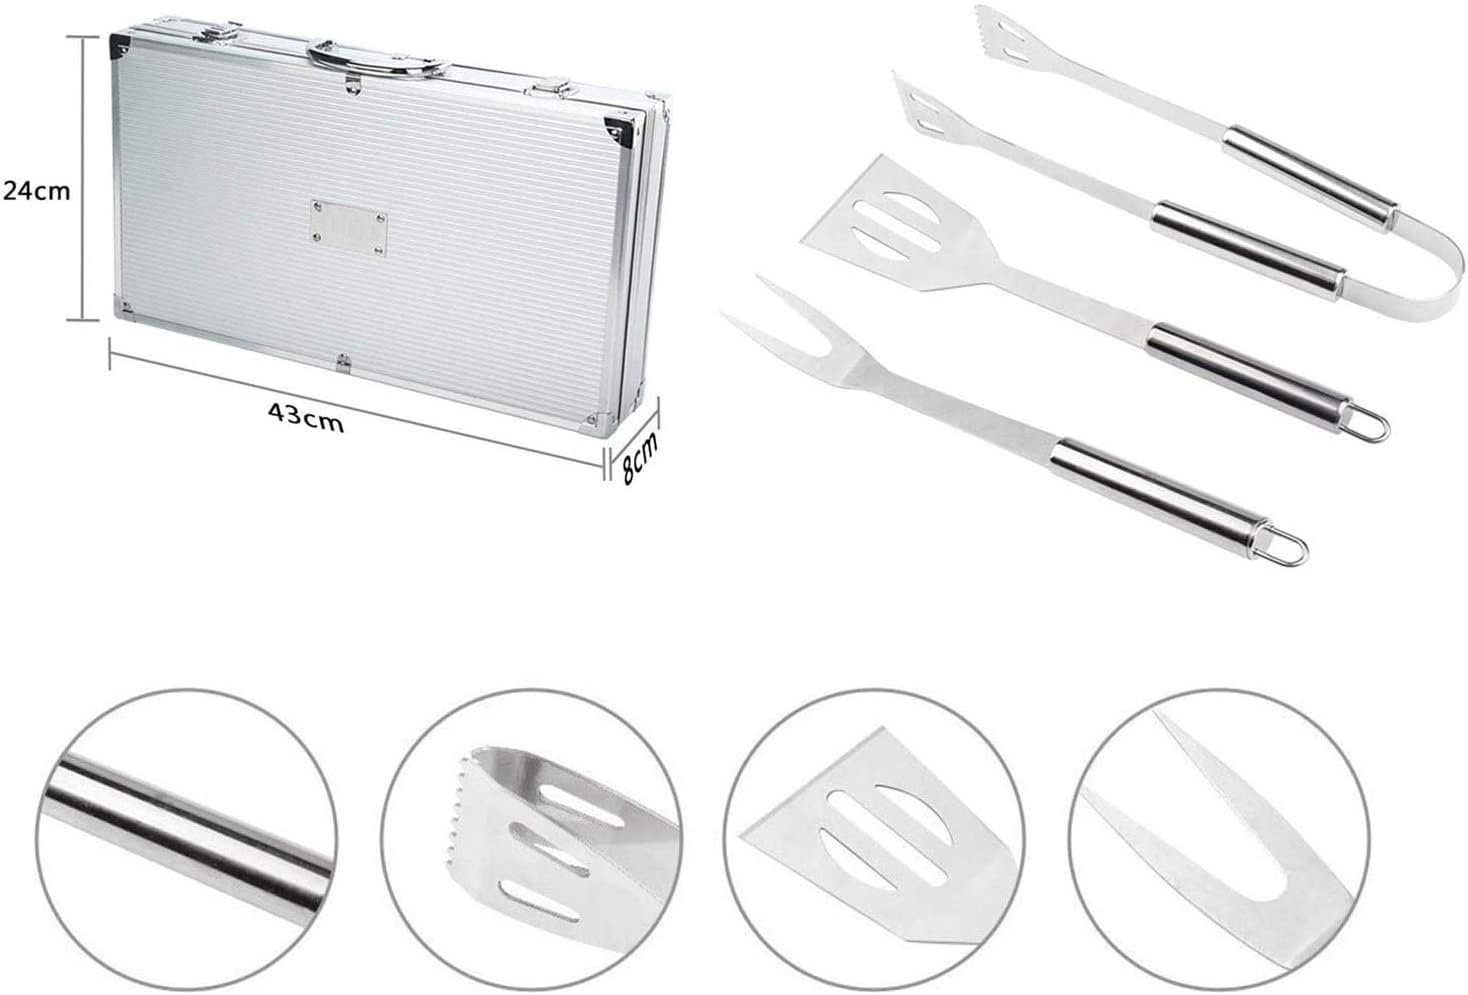 18 Pcs BBQ Griddle Tools Set, Flat Top Barbeque Grill Cooking Kit